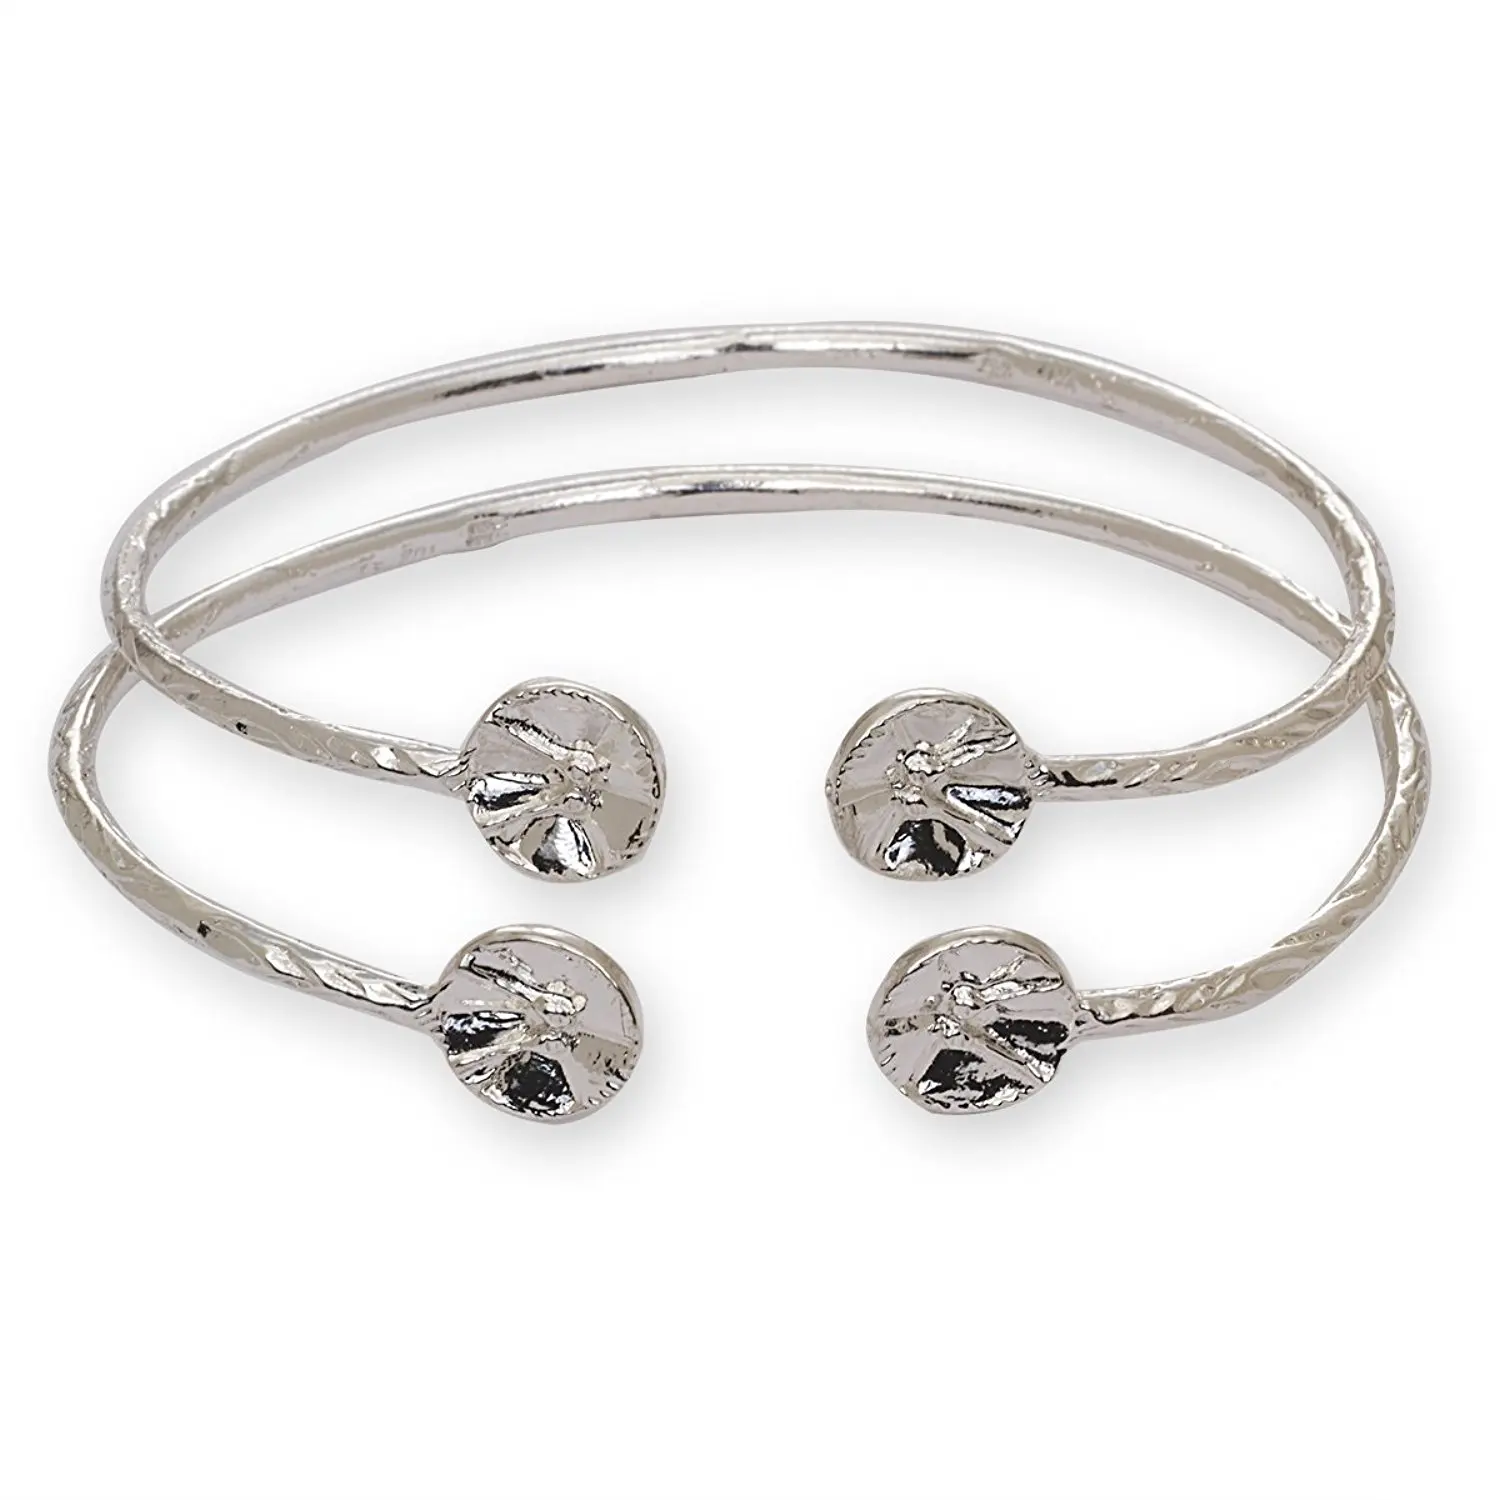 Cheap West Indian Sterling Silver Bangles, find West Indian Sterling ...